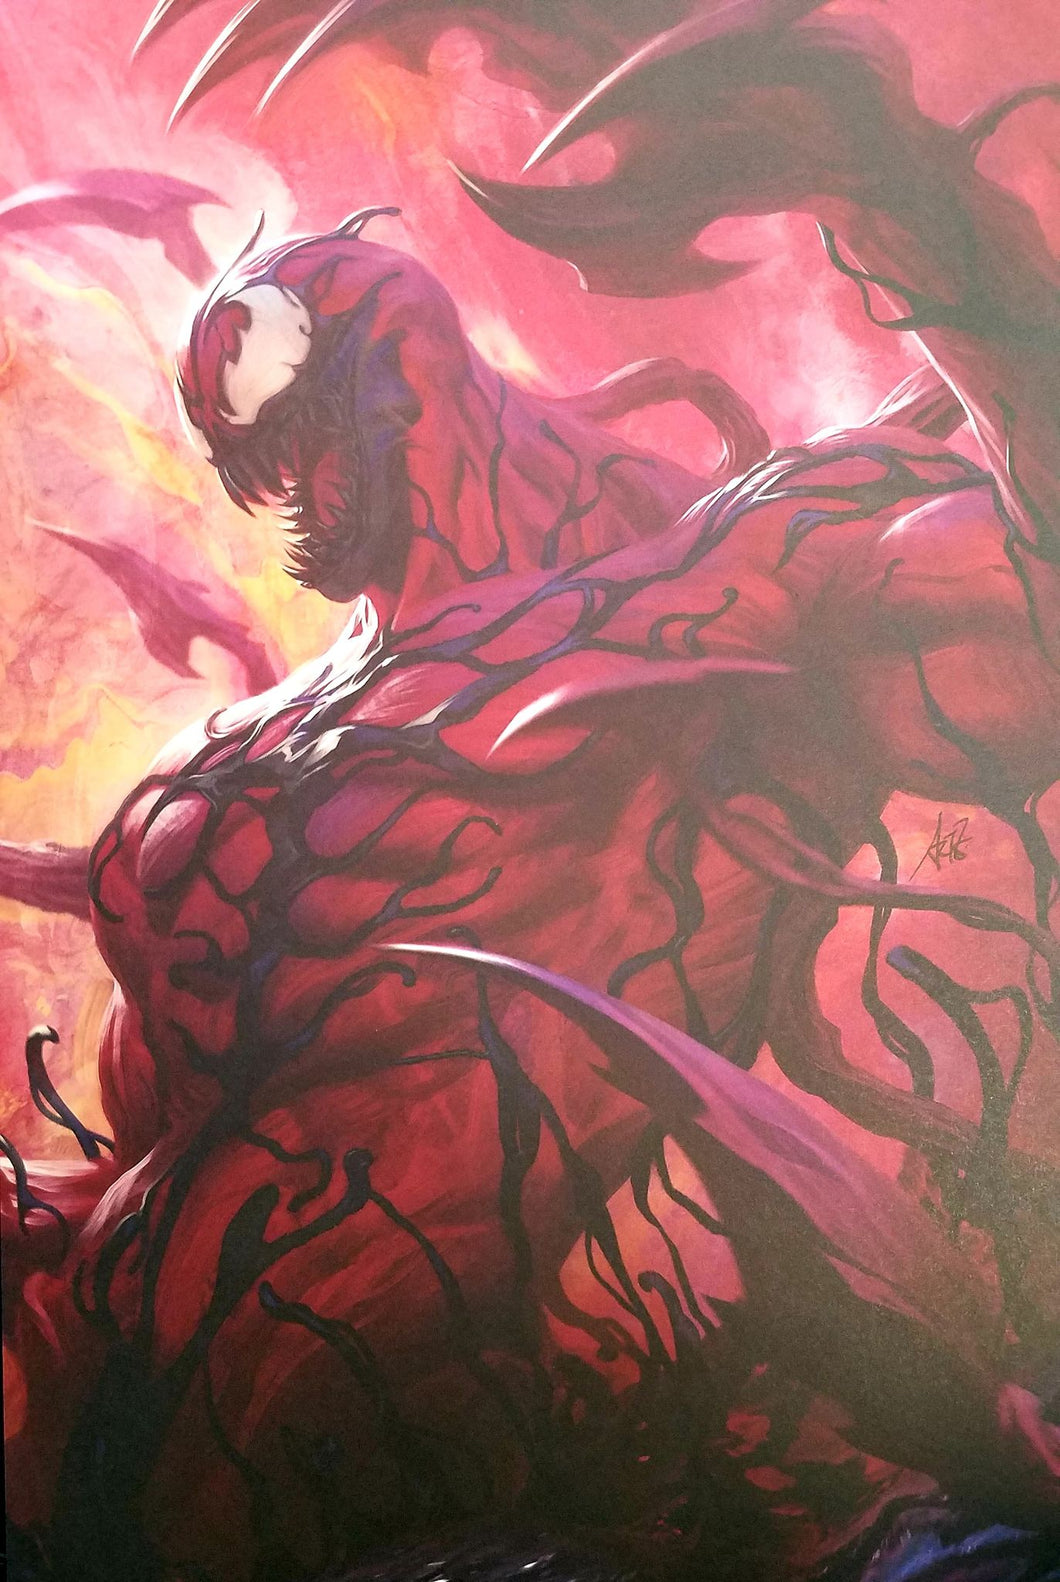 Carnage Art Poster Print by Stanley 